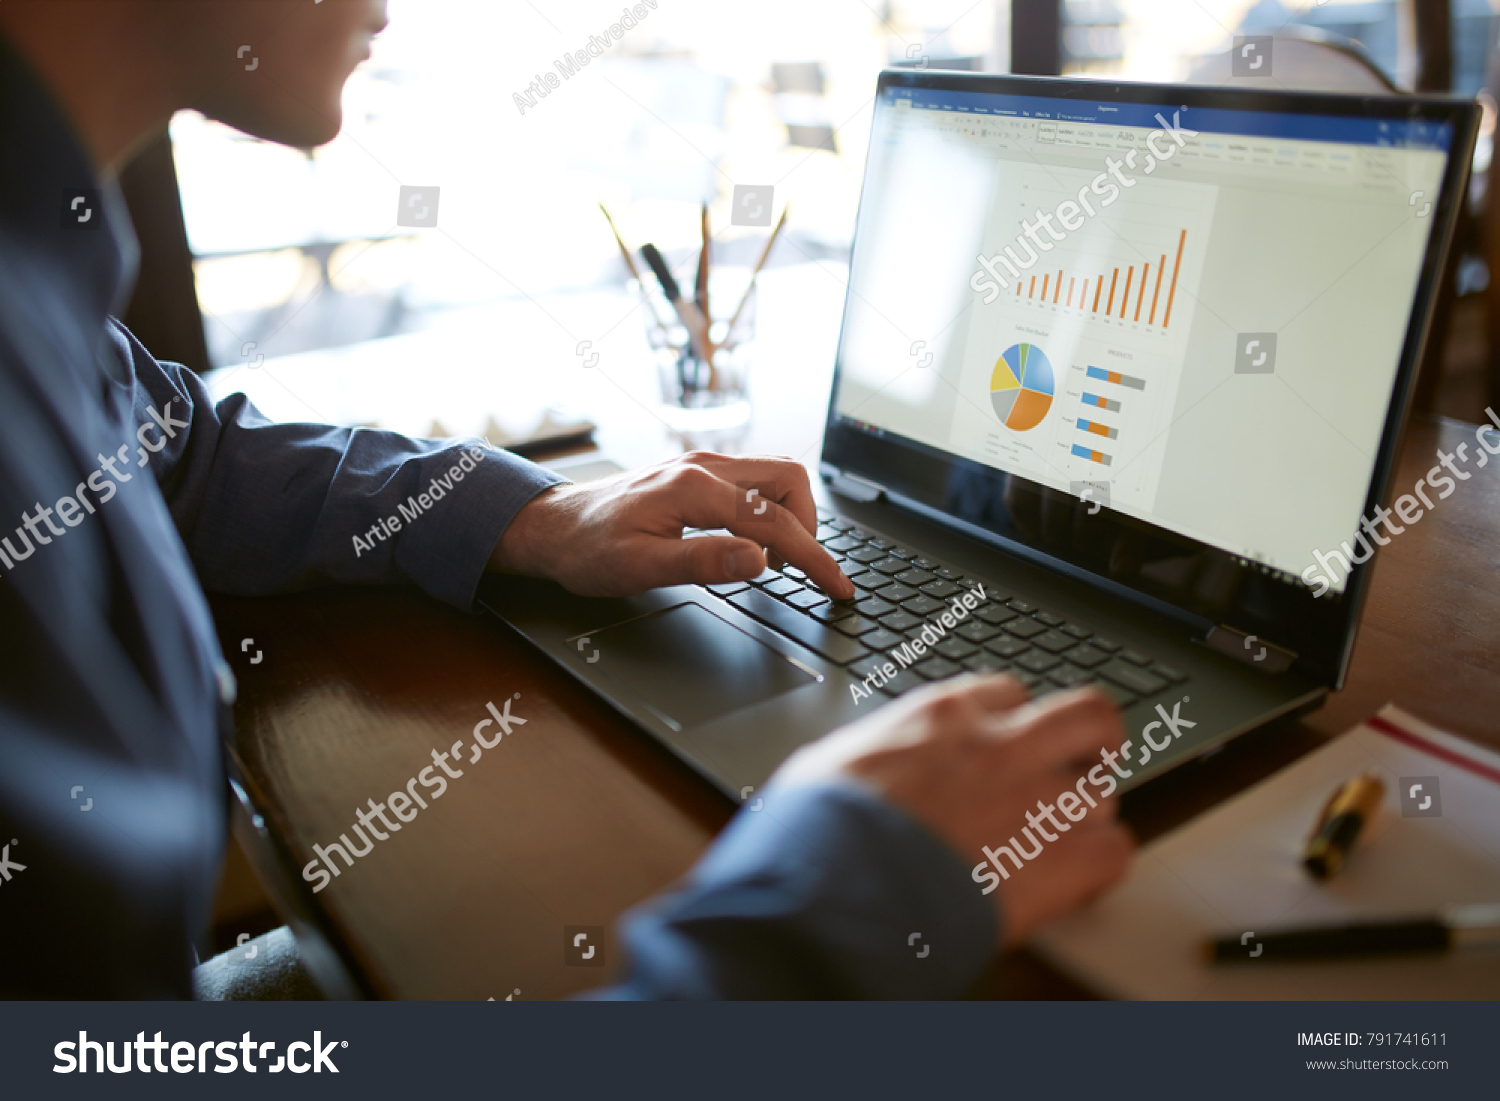 Close-up back view of caucasian businessman hands typing on laptop keyboard and using touchpad. Notebook and pen on foreground of workspace. Charts and diagrams on screen. Isolated no face view. #791741611